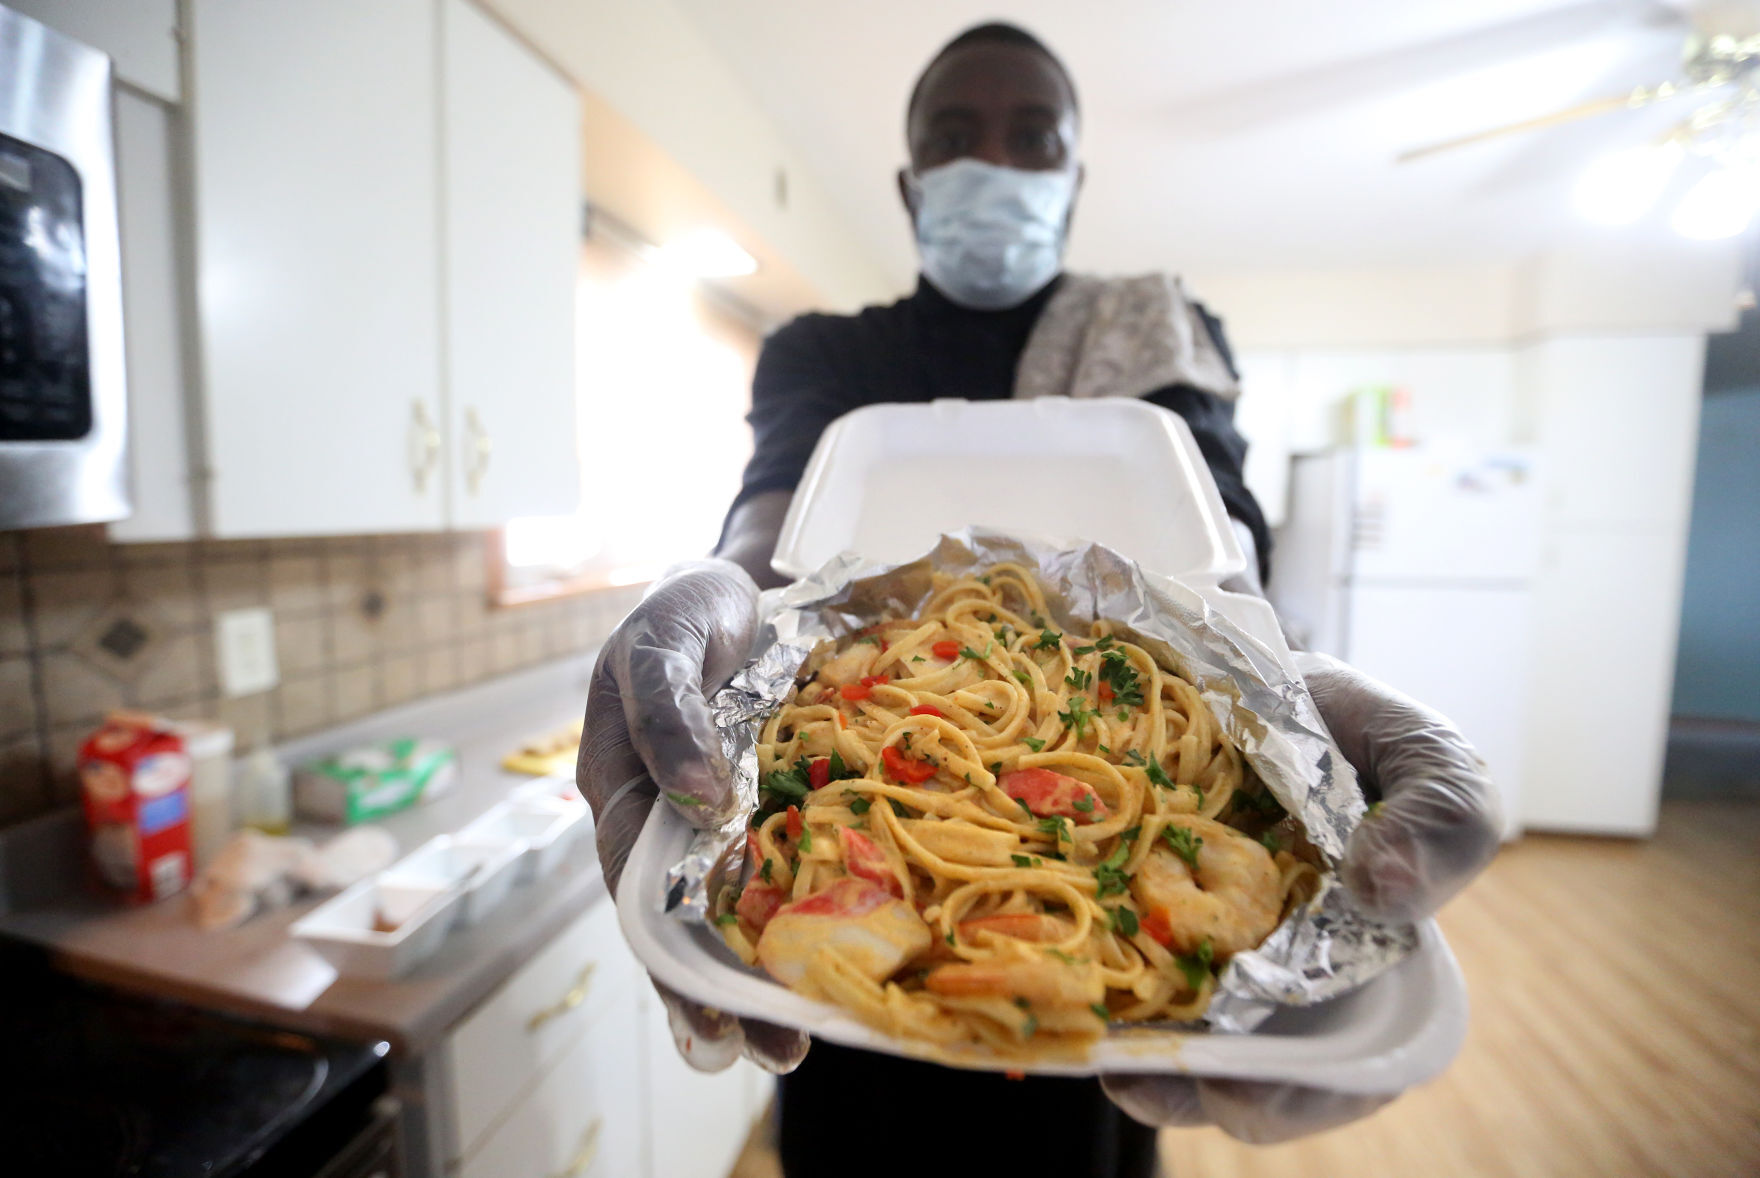 Ty Beard, with Just Like Home Catering, holds up a cajun seafood pasta dish at his home in Asbury, Iowa, on Monday. PHOTO CREDIT: JESSICA REILLY